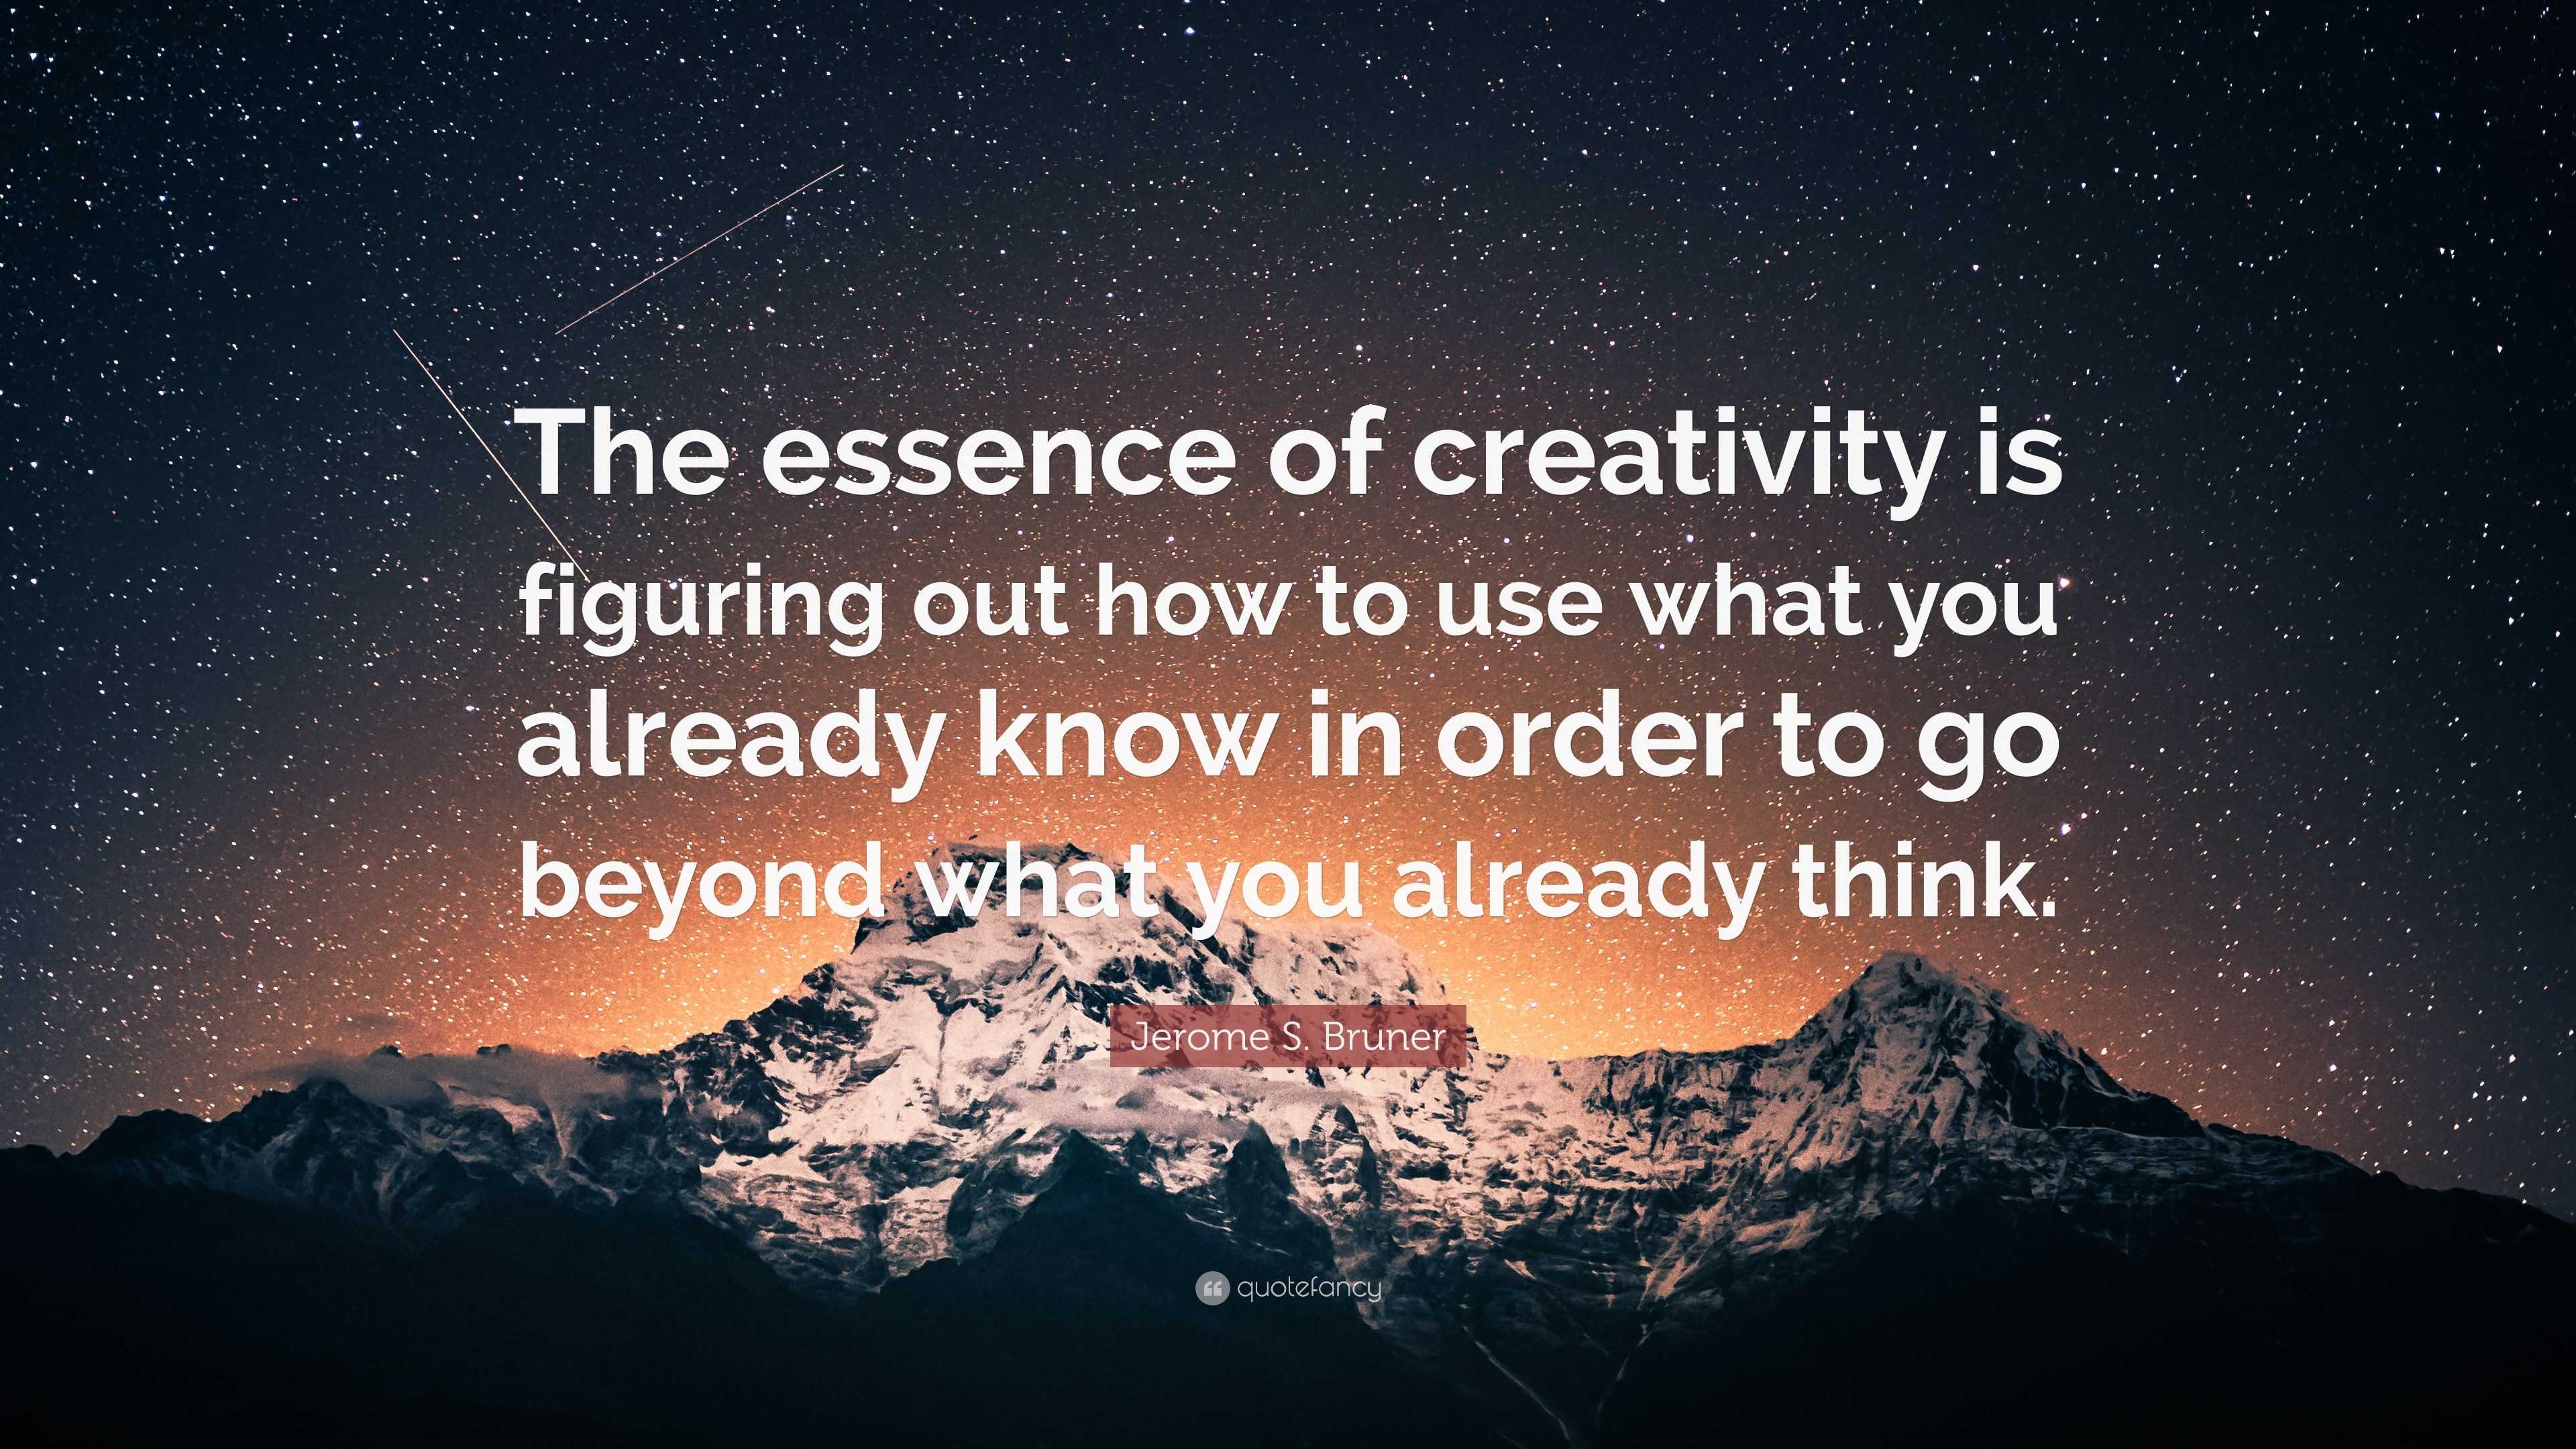 Creativity is having the ability to look beyond what's considered